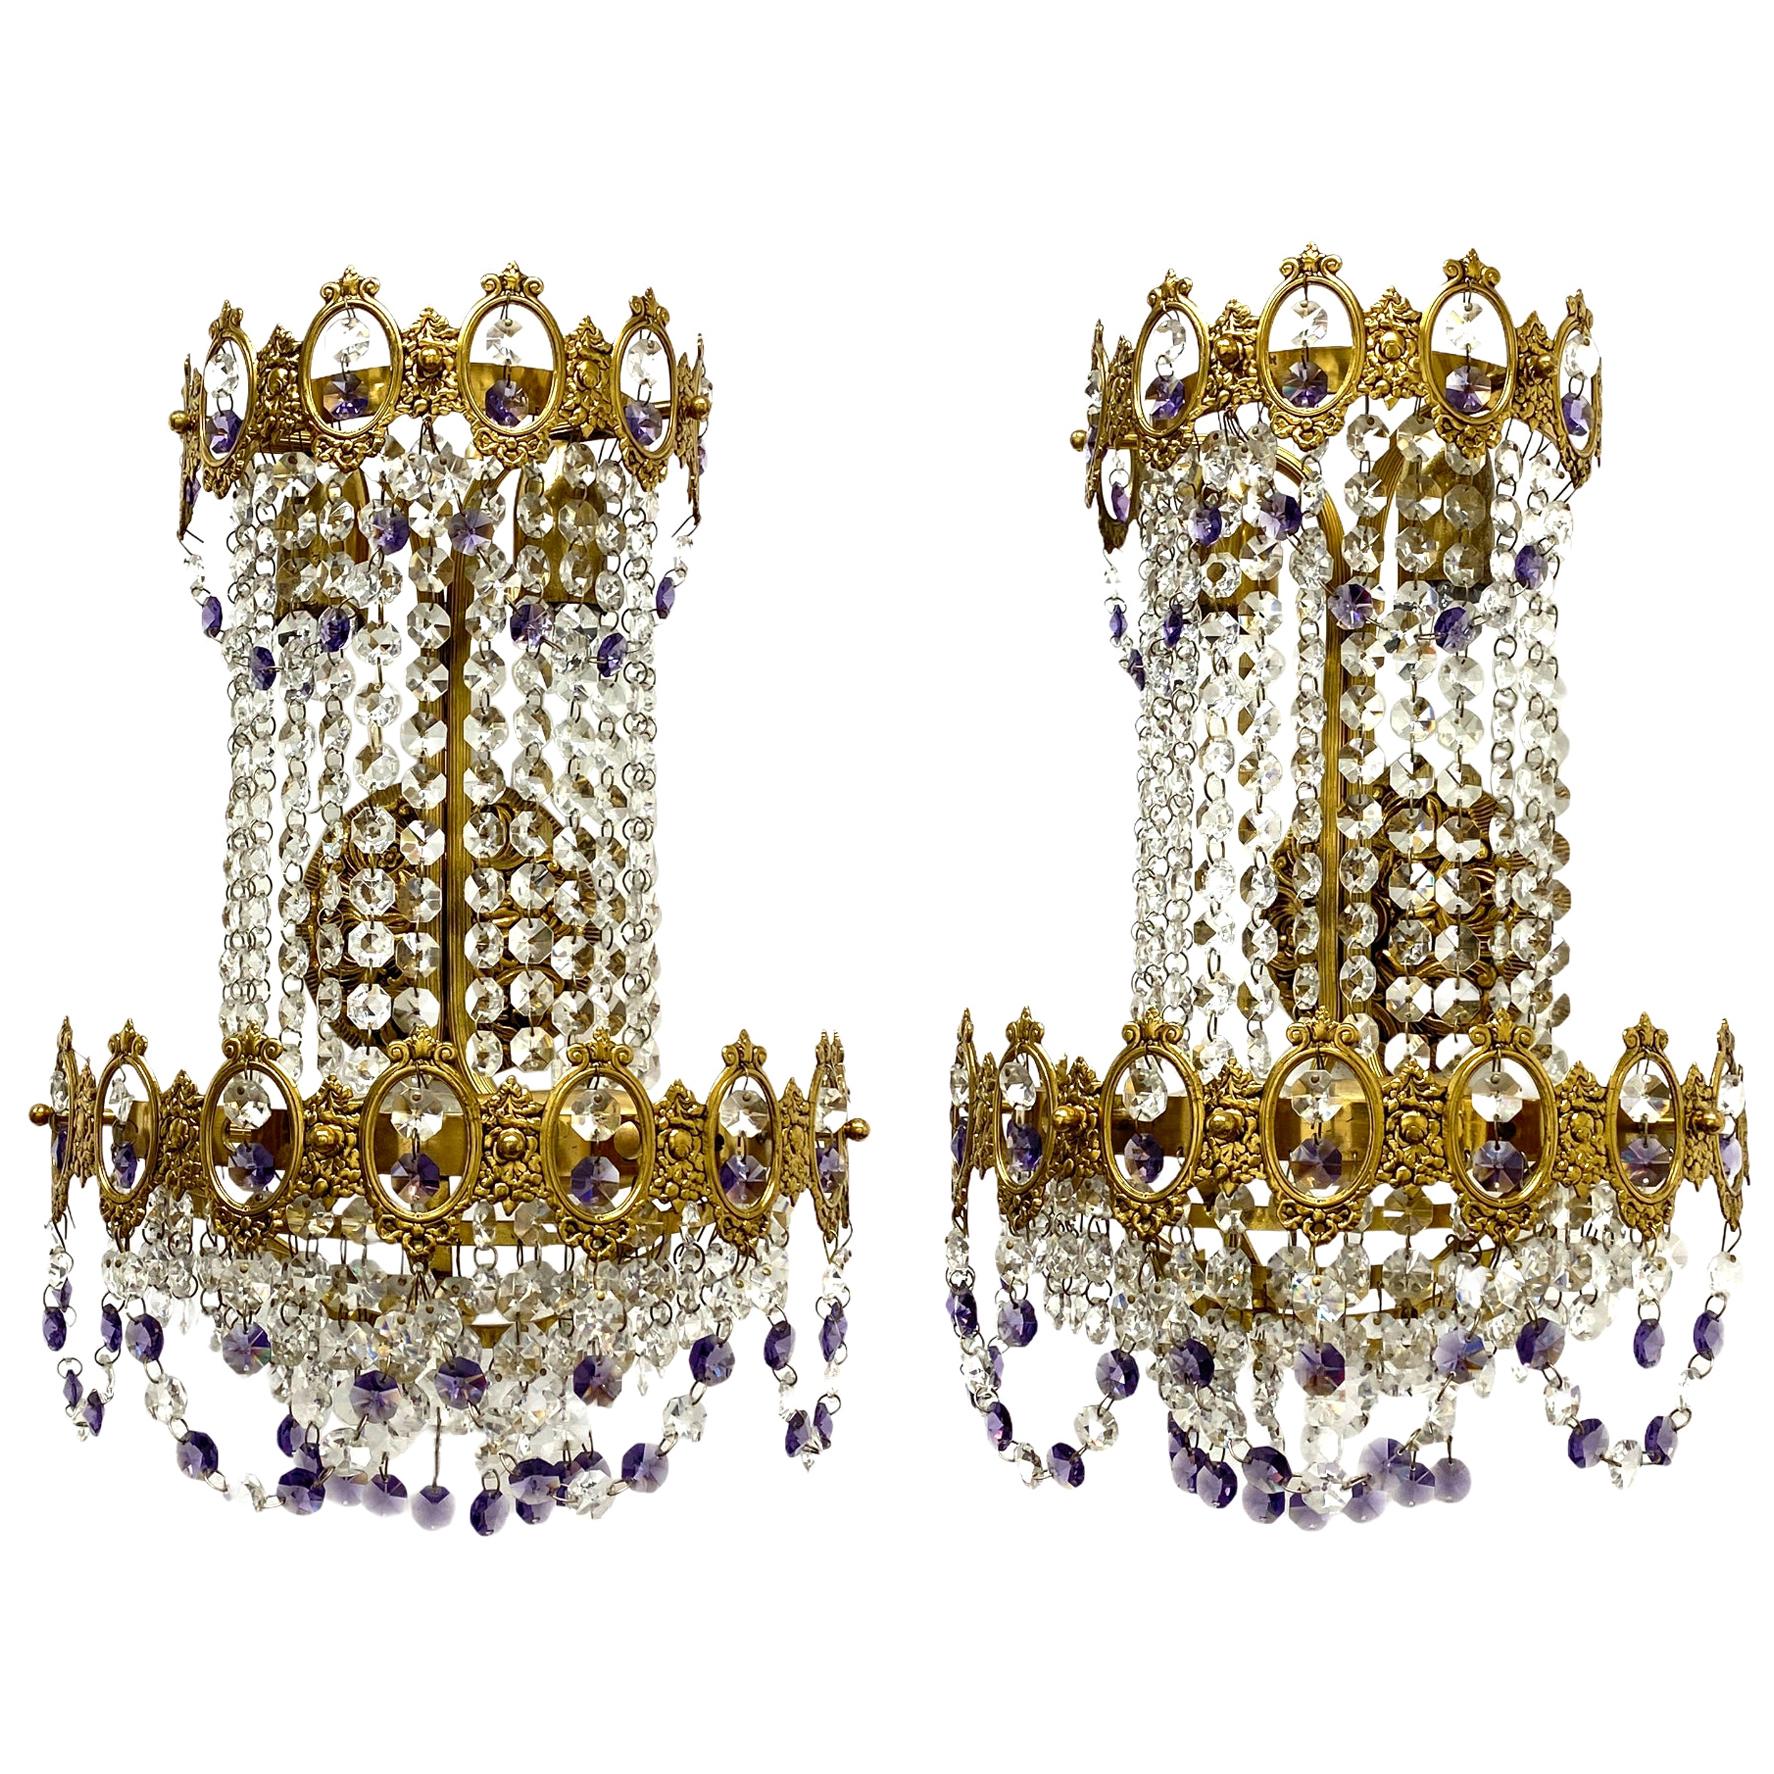 Pair of Monumental Empire Style Crystal and Bronze Sconces, Austria, 1930s For Sale